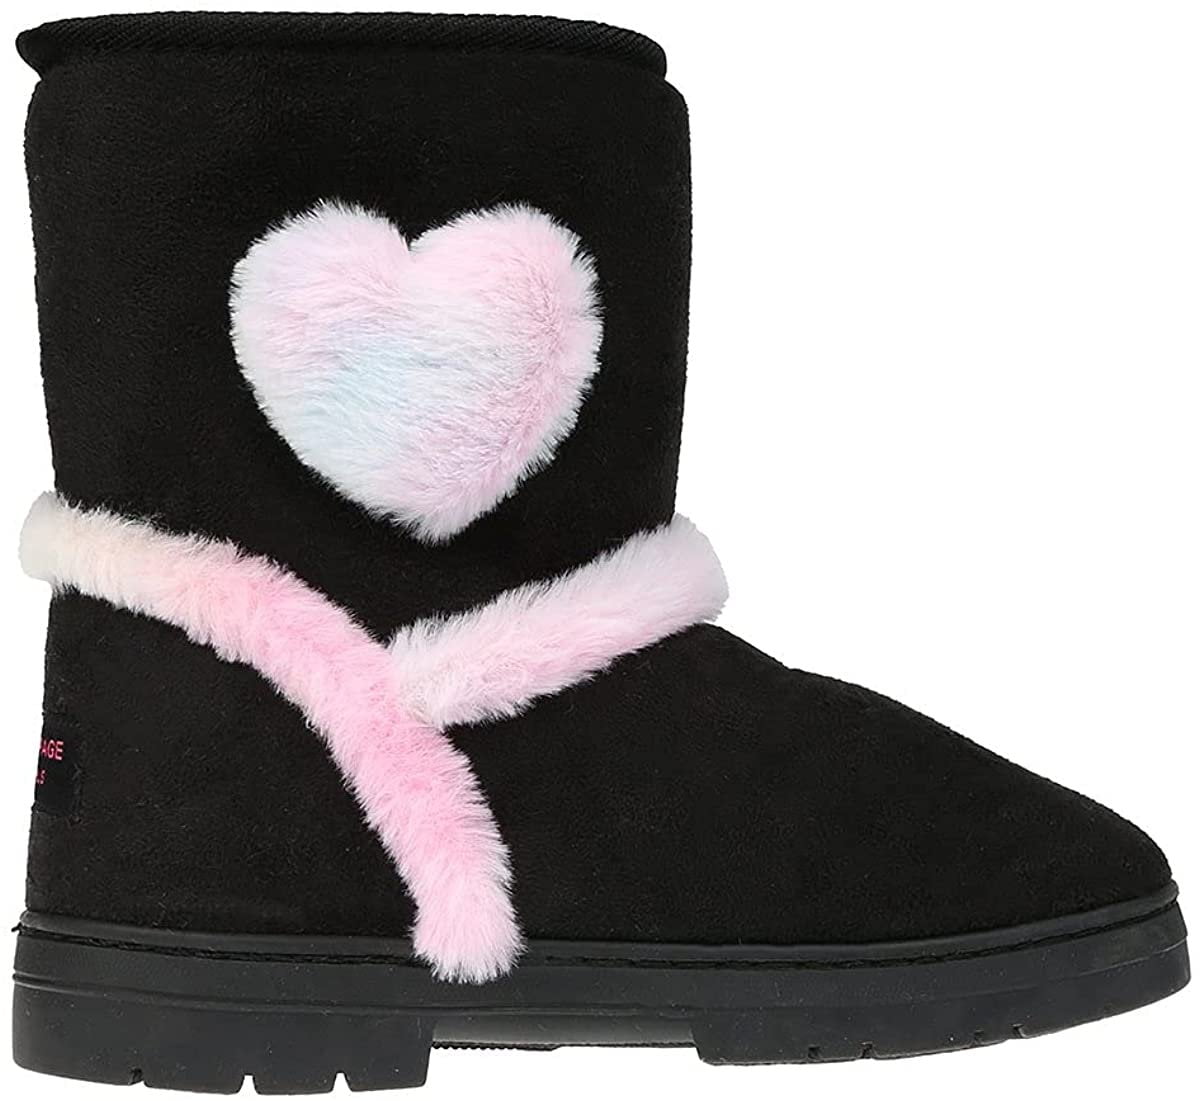 26 Accessories Toddler Girls Microsuede Snow Boots with Faux Fur Cuffs Slip-On Winter Shoes 